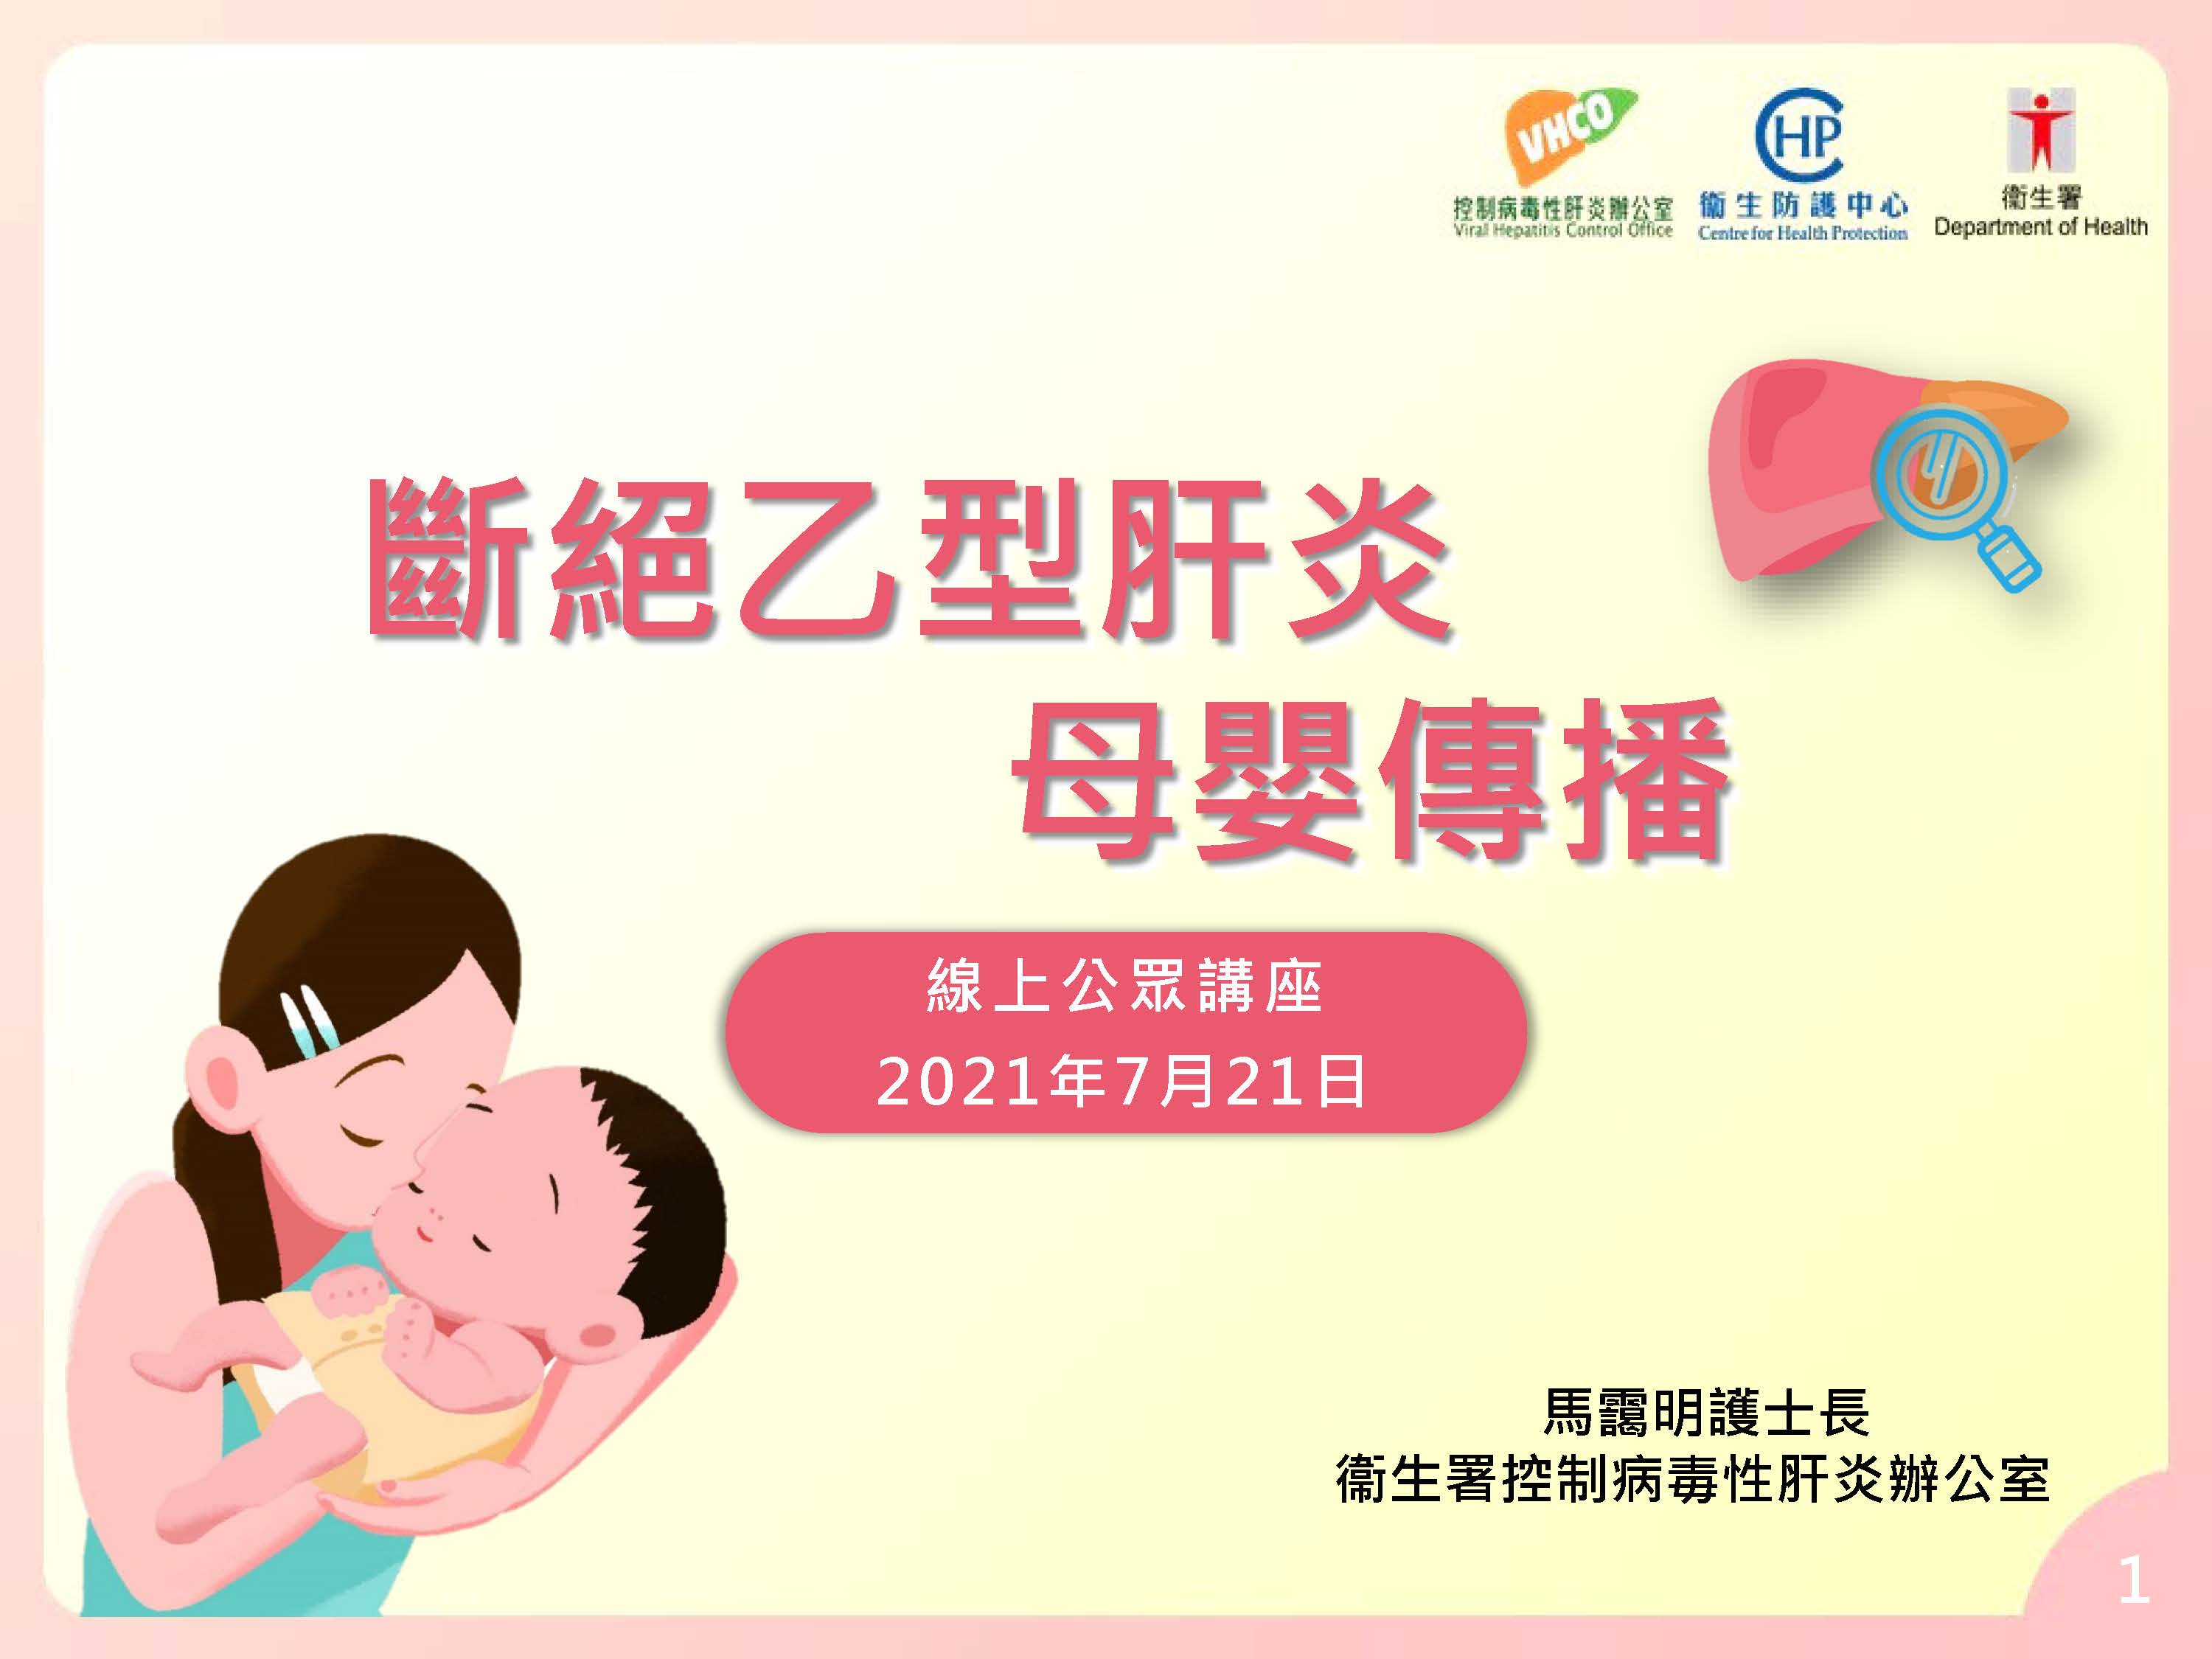 The Viral Hepatitis Control Office co-organised an online public health talk with Family Health Service (only Chinese version available)